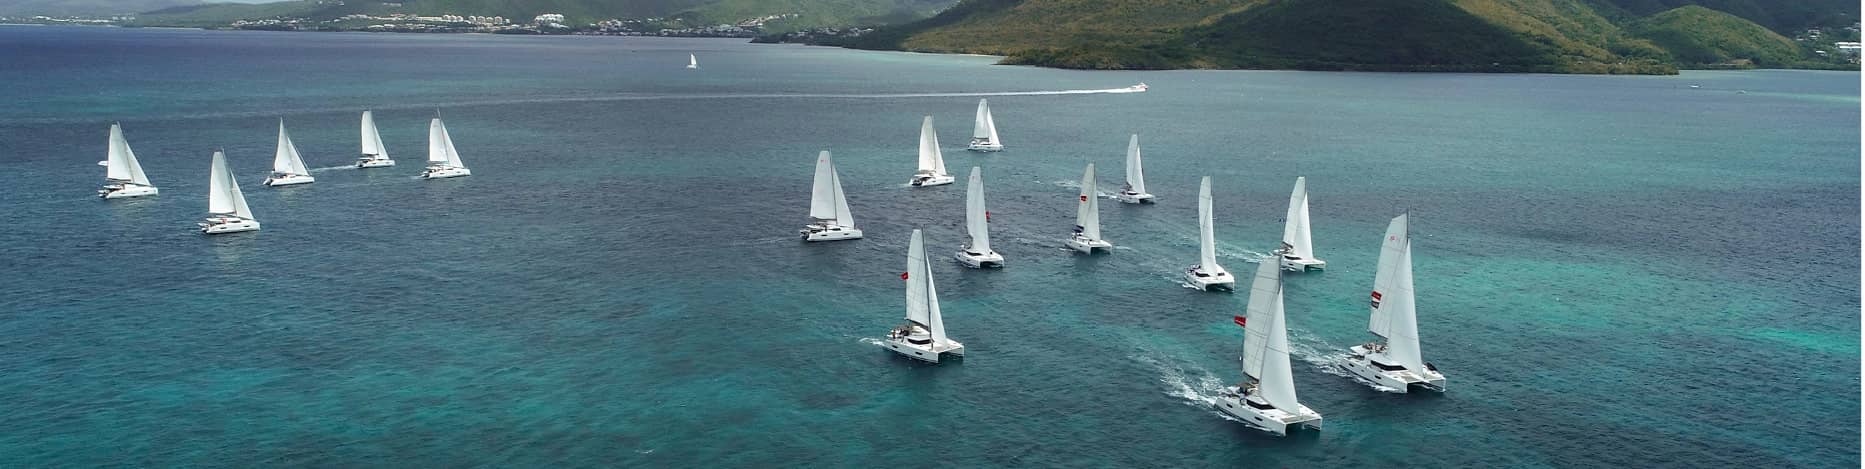 fountaine-pajot-owners-rendez-vous-martinique-2019-ban.jpg